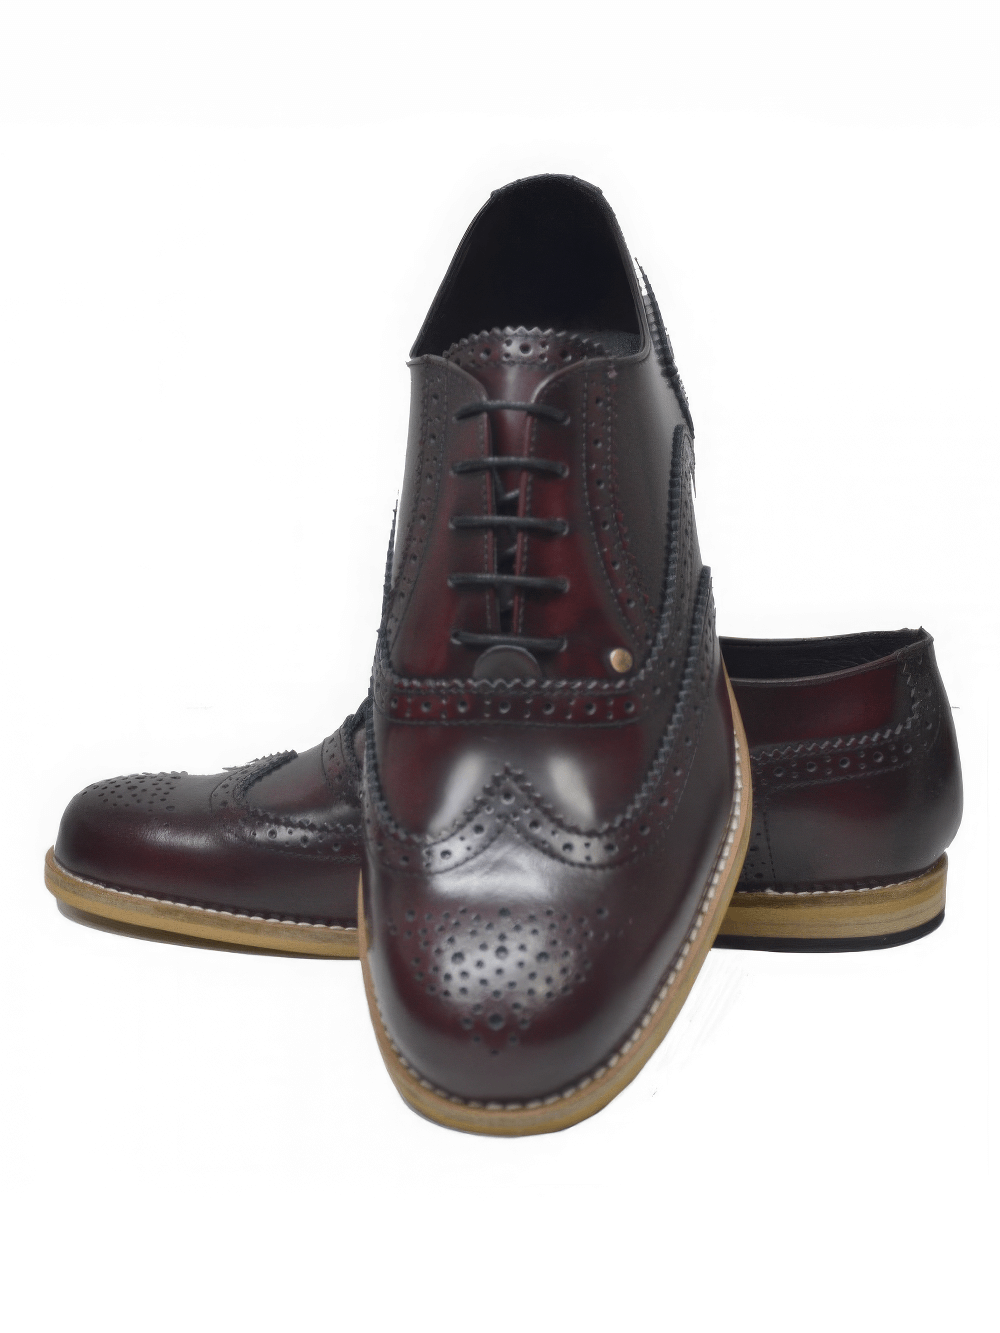 Unisex Burgundy Leather Oxford Shoes with Flat Neolite Sole